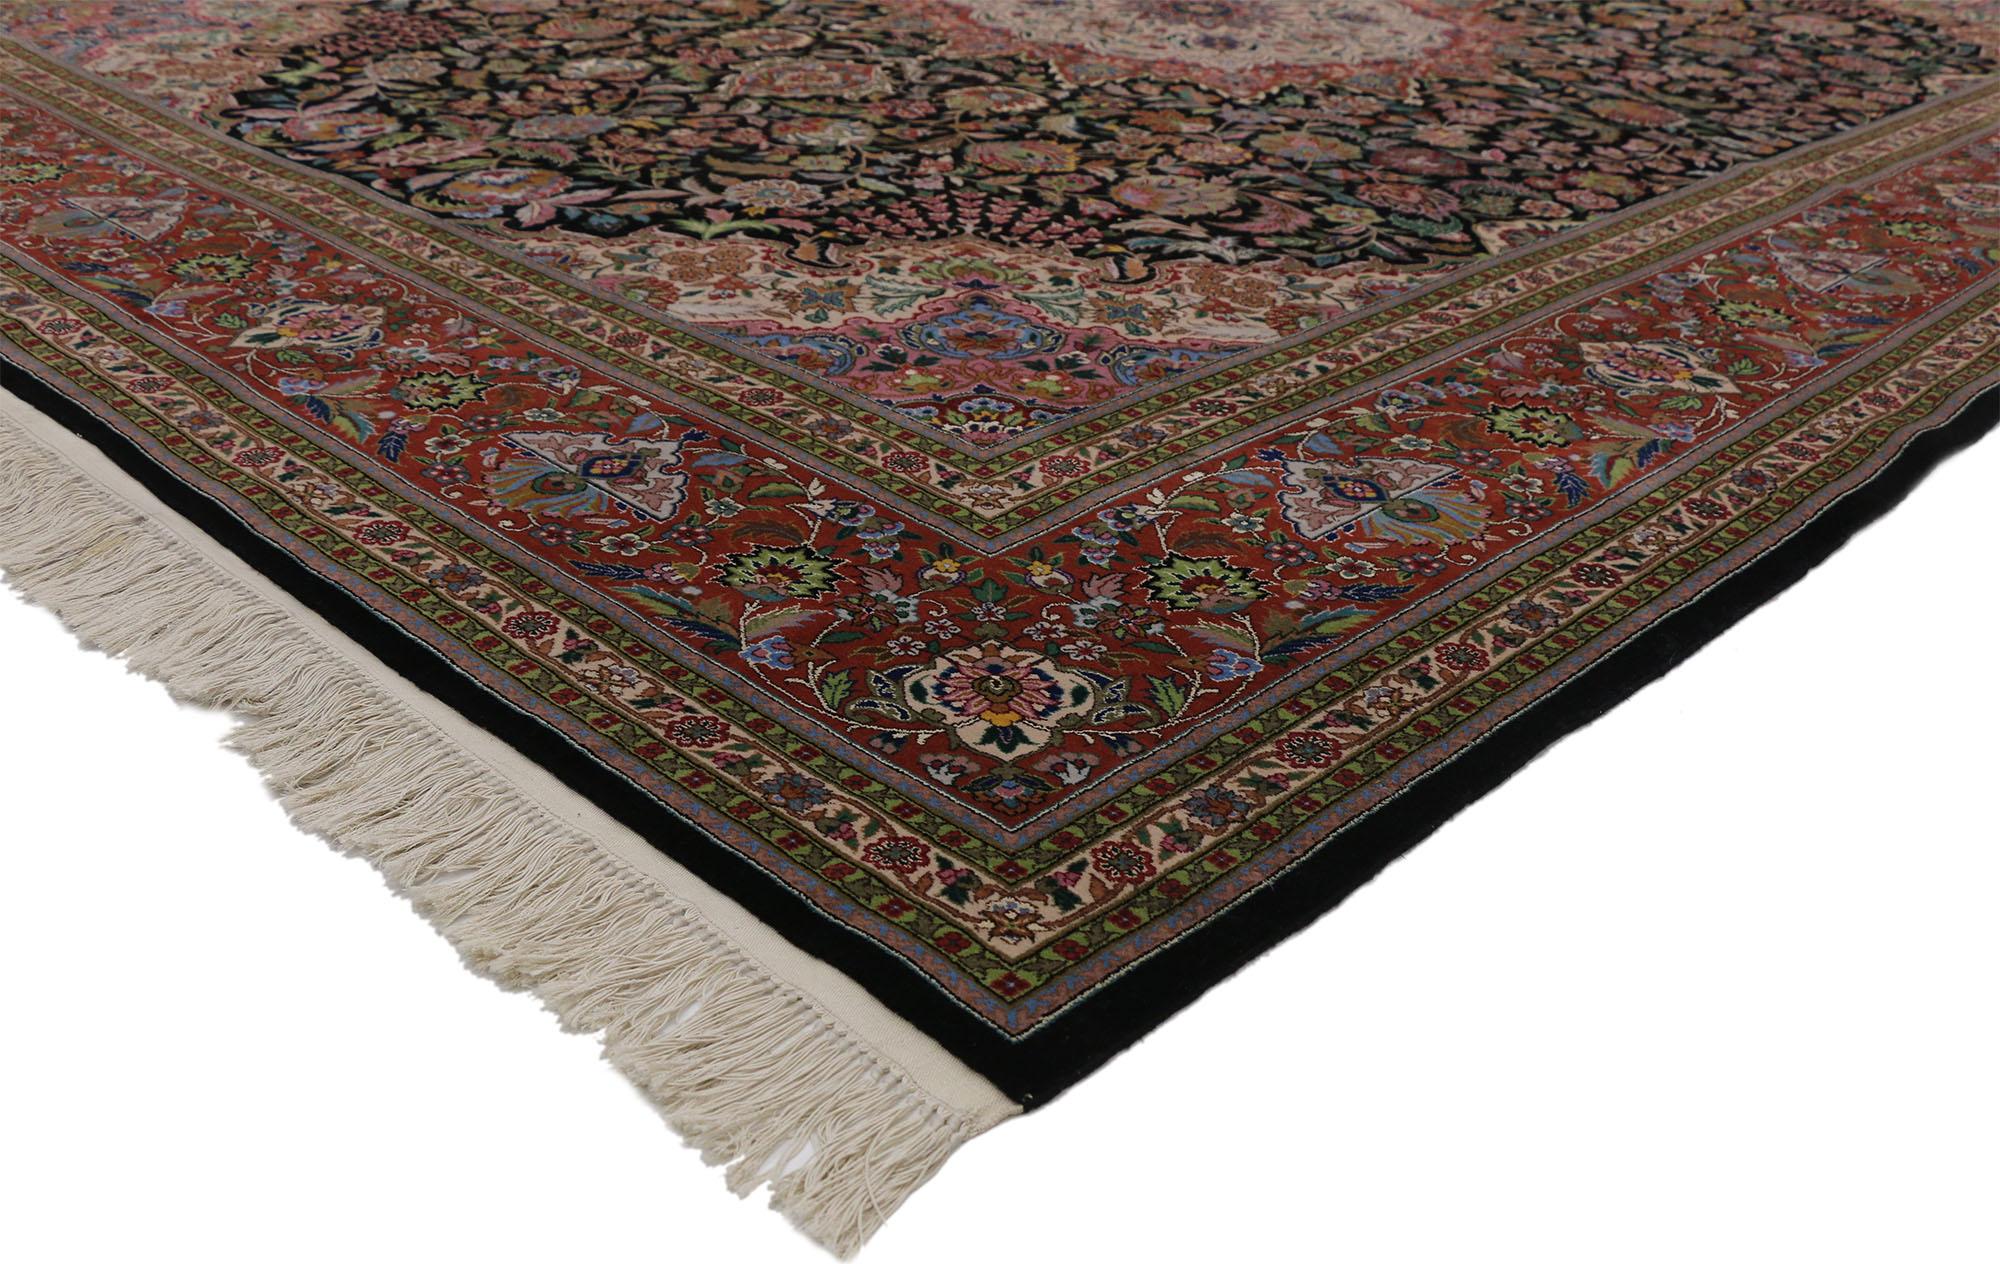 77256, vintage Chinese Persian Tabriz Design rug with Victorian Baroque style. Rich in color, texture and beguiling ambiance, this vintage Chinese Persian Kashan accent rug beautifully displays timeless elegance and regal charm. It features a